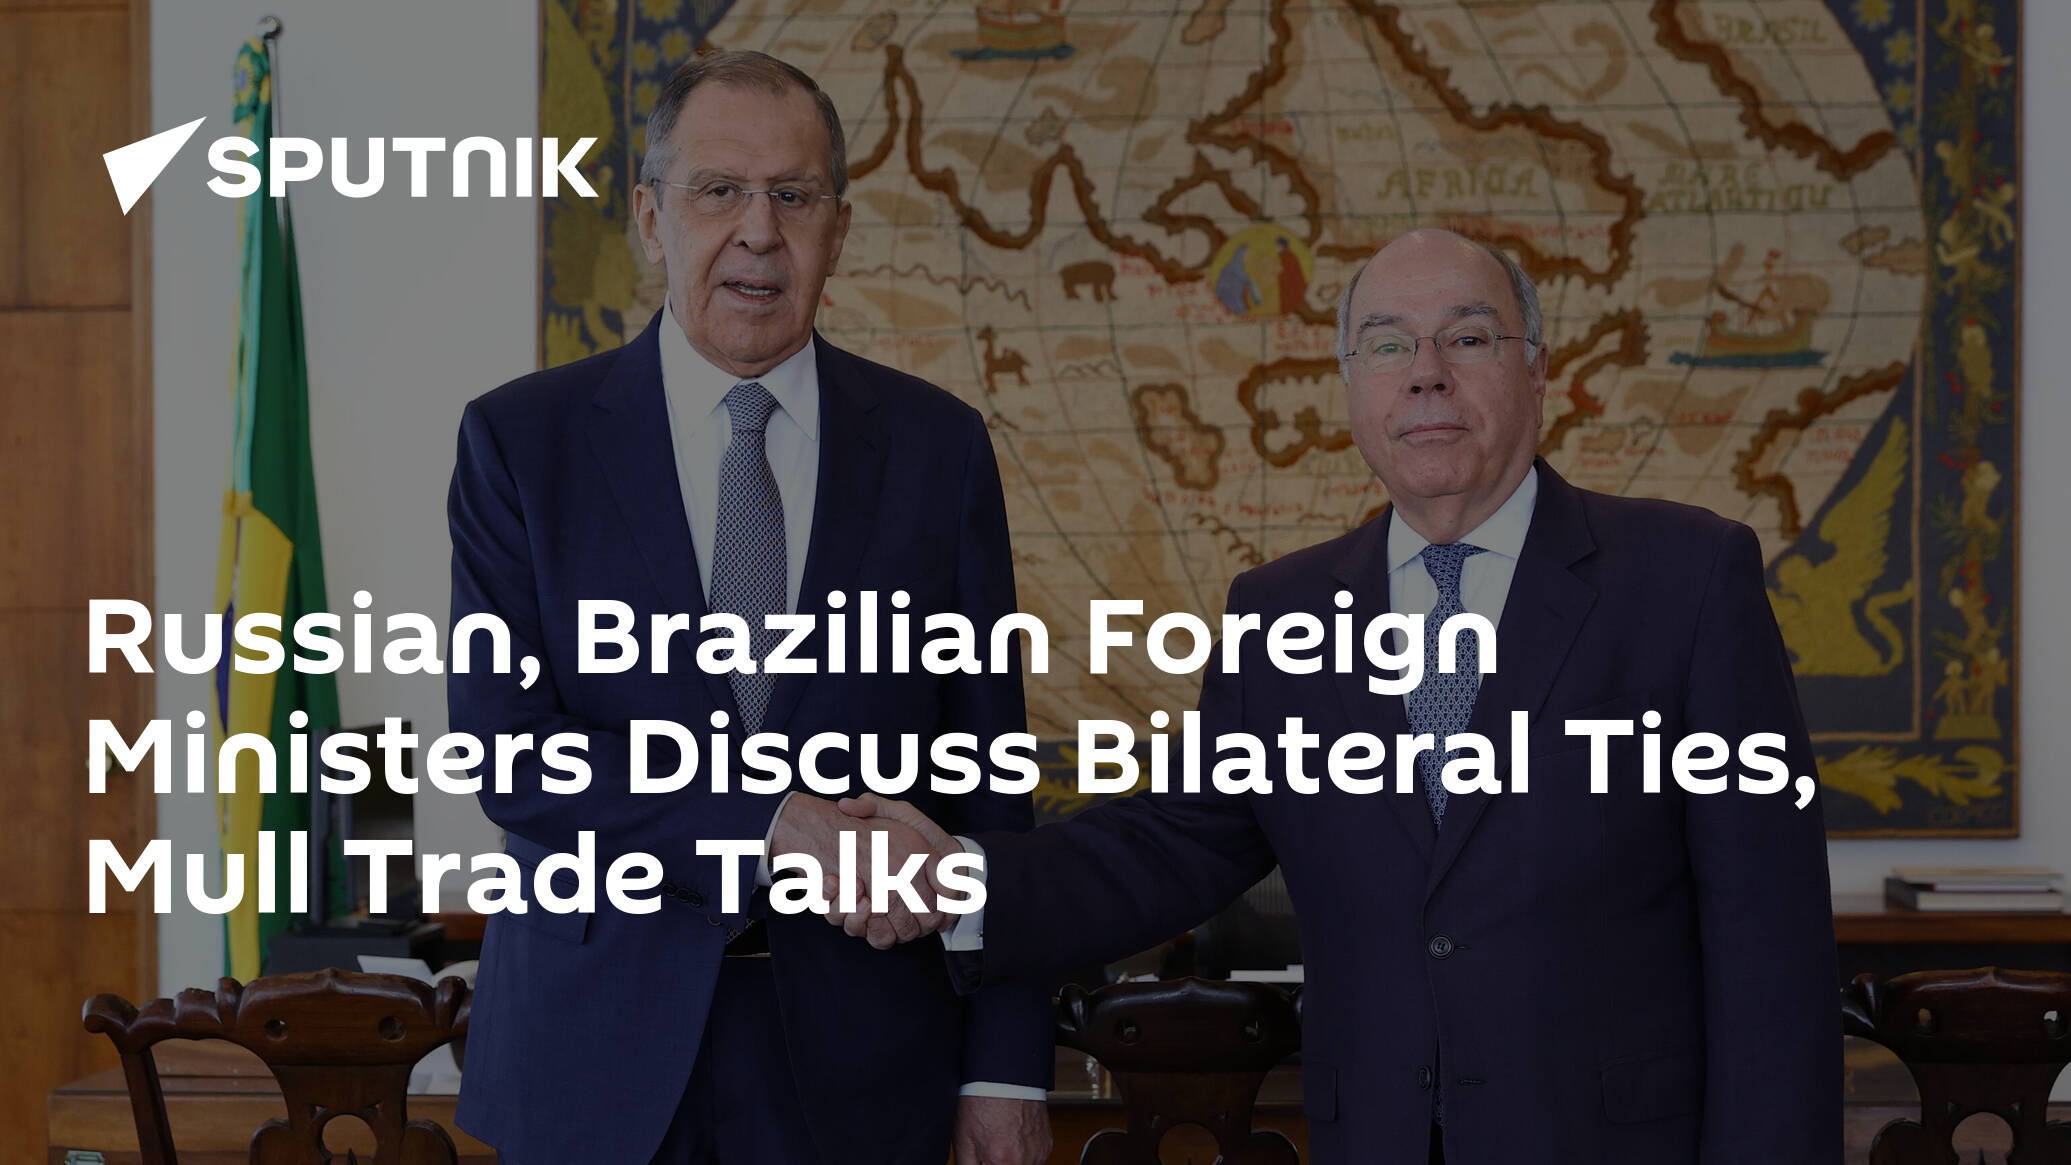 Russian, Brazilian Foreign Ministers Discuss Bilateral Ties, Mull Trade Talks